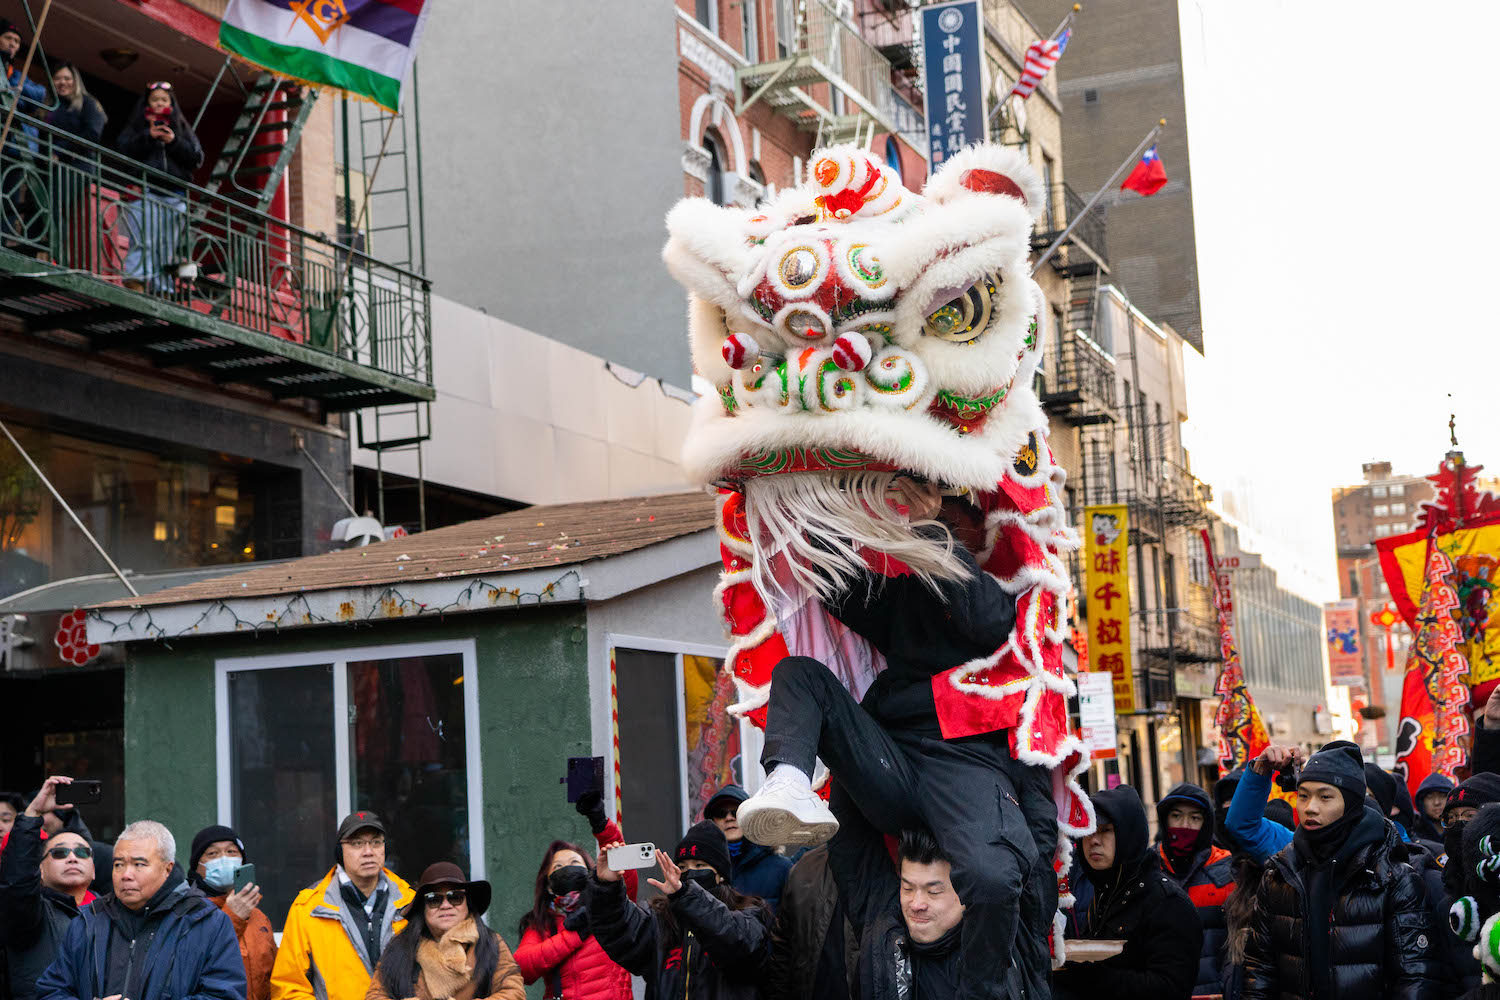 A lion dancer lifting his partner to make the lion costume rise during a performance.